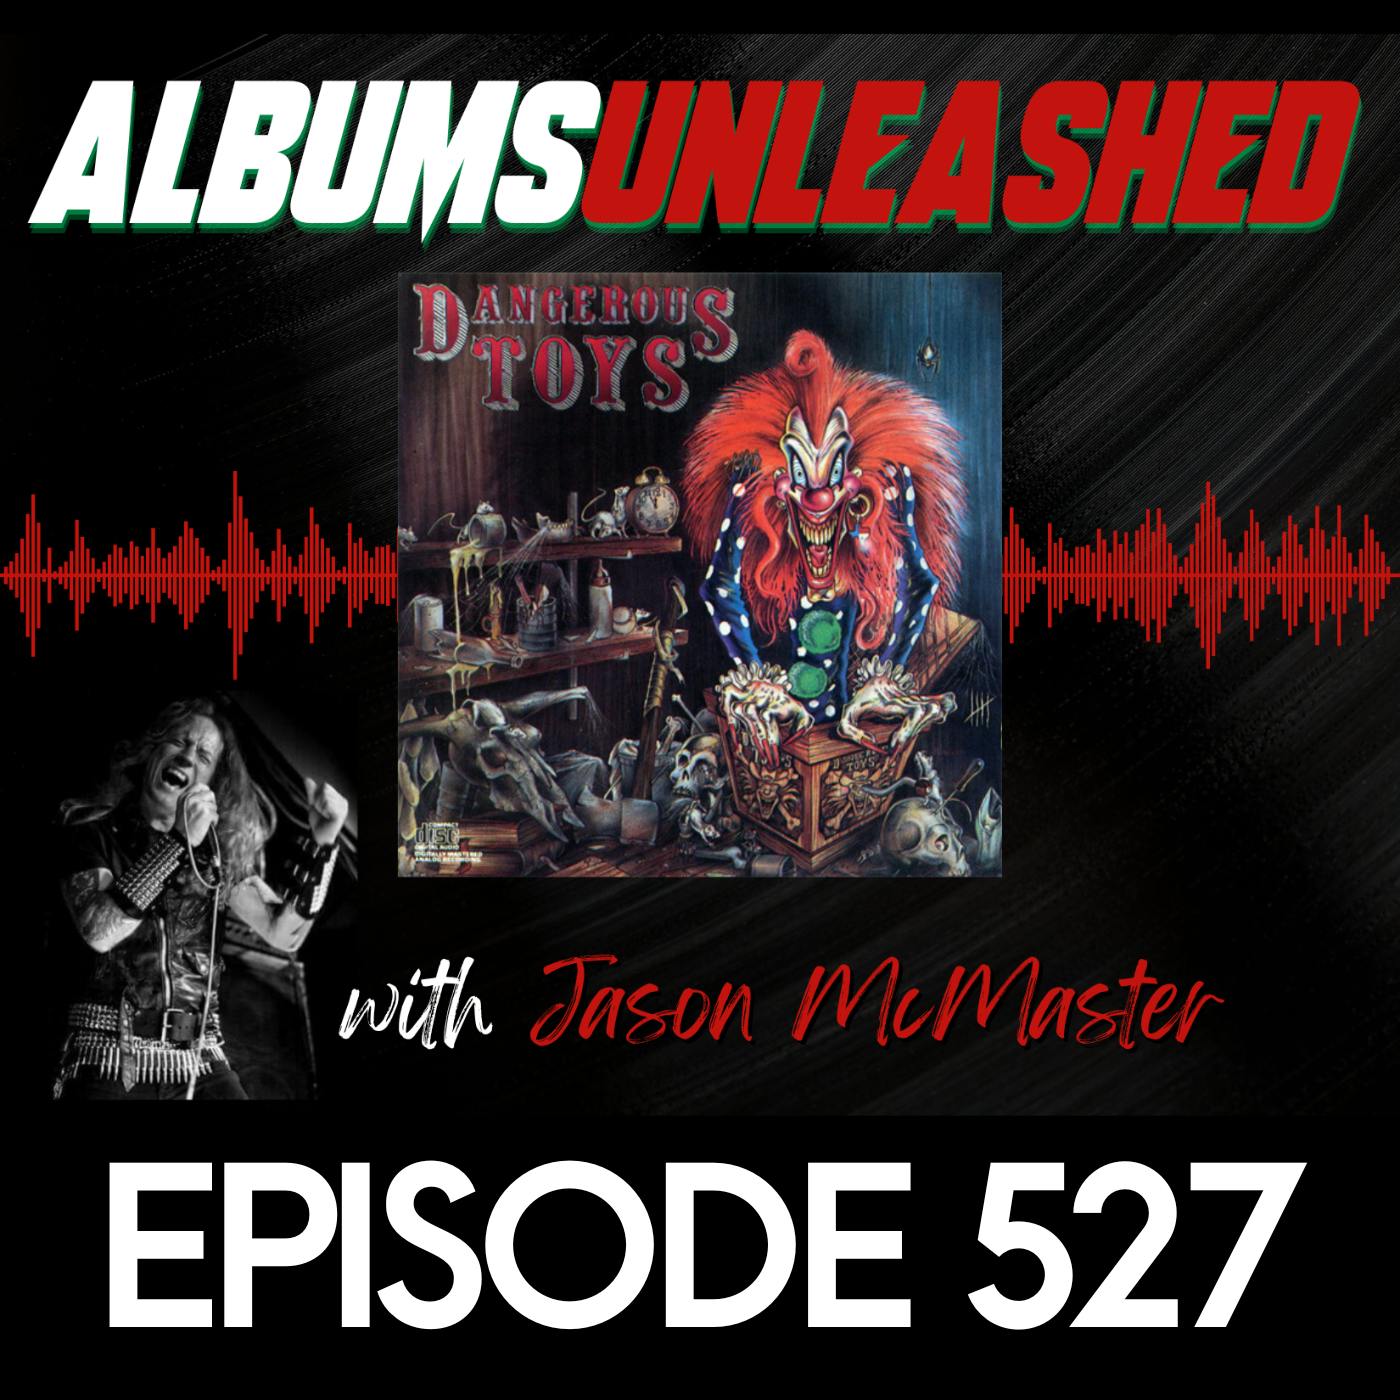 Albums Unleashed Dangerous Toys with Jason McMaster - Ep527